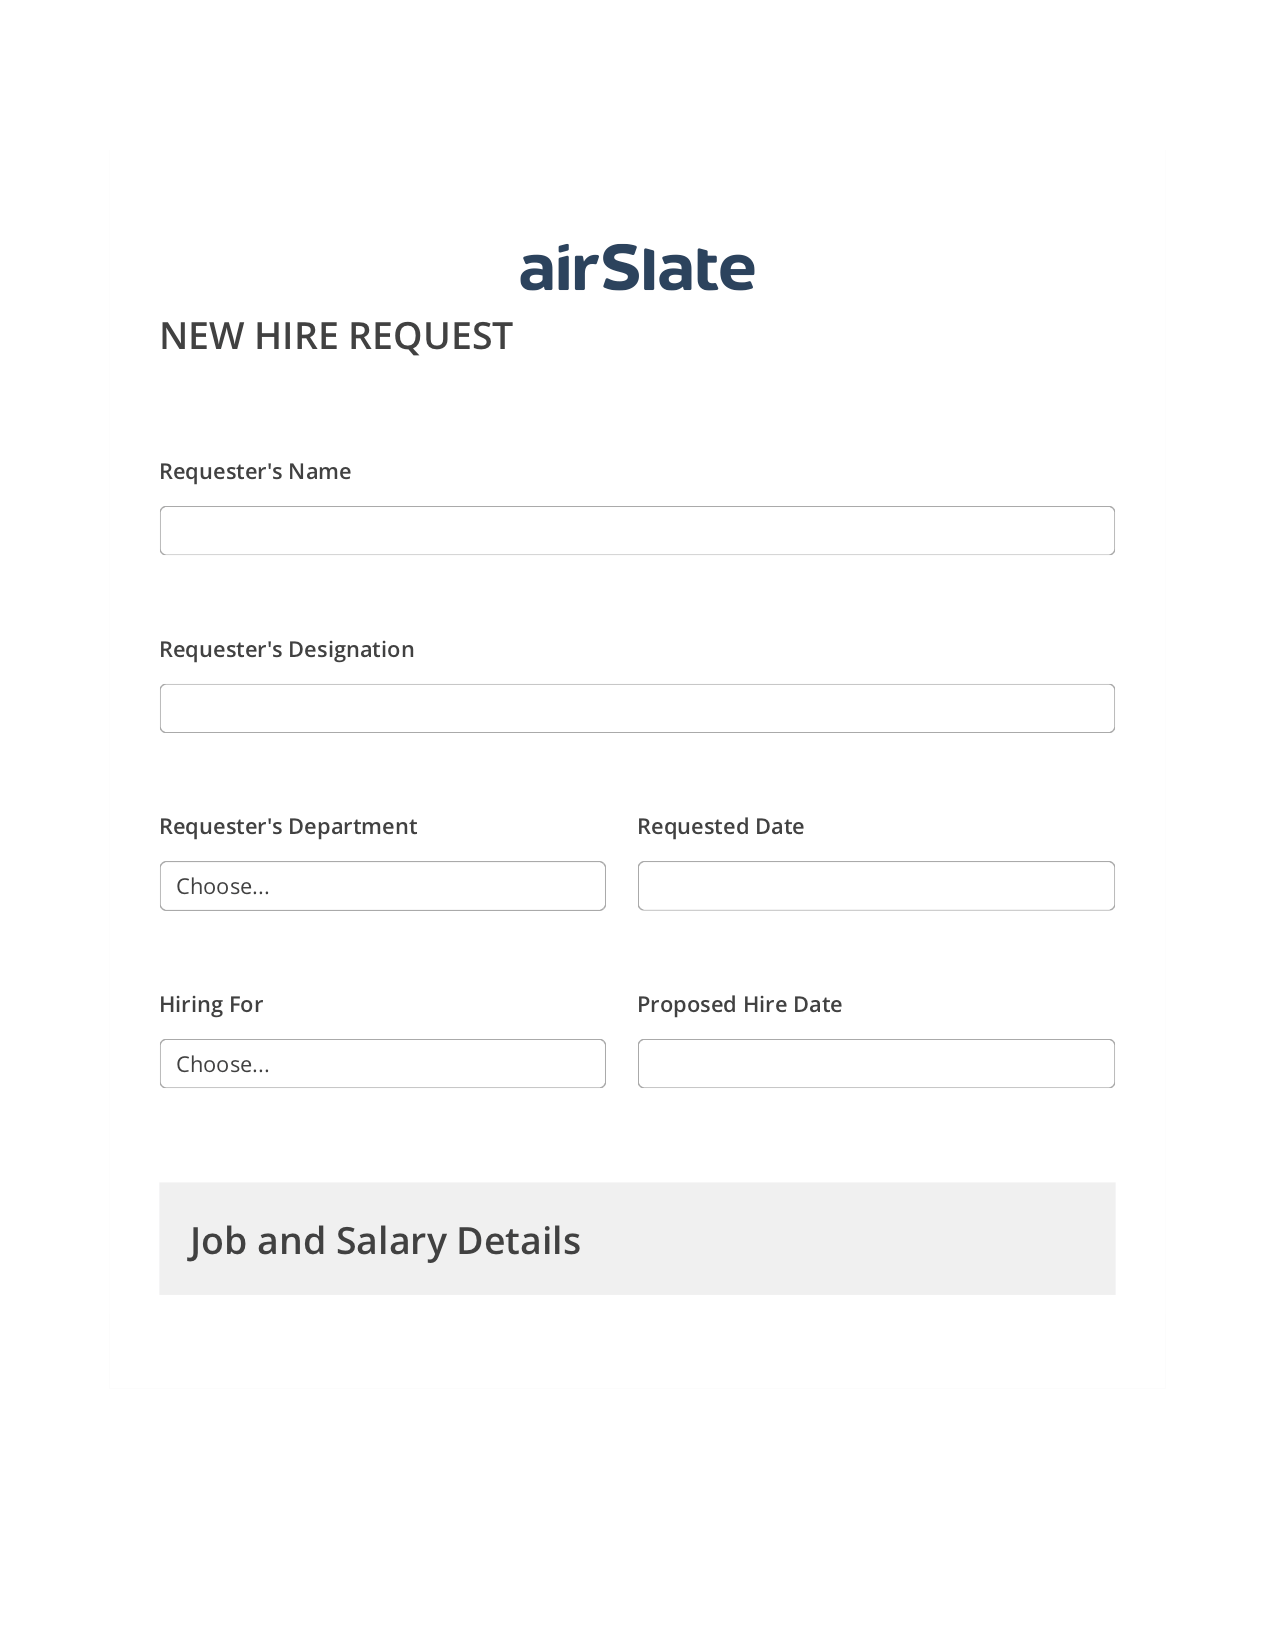 Hiring Request Workflow Pre-fill from CSV File Bot, Hide Signatures Bot, Post-finish Document Bot